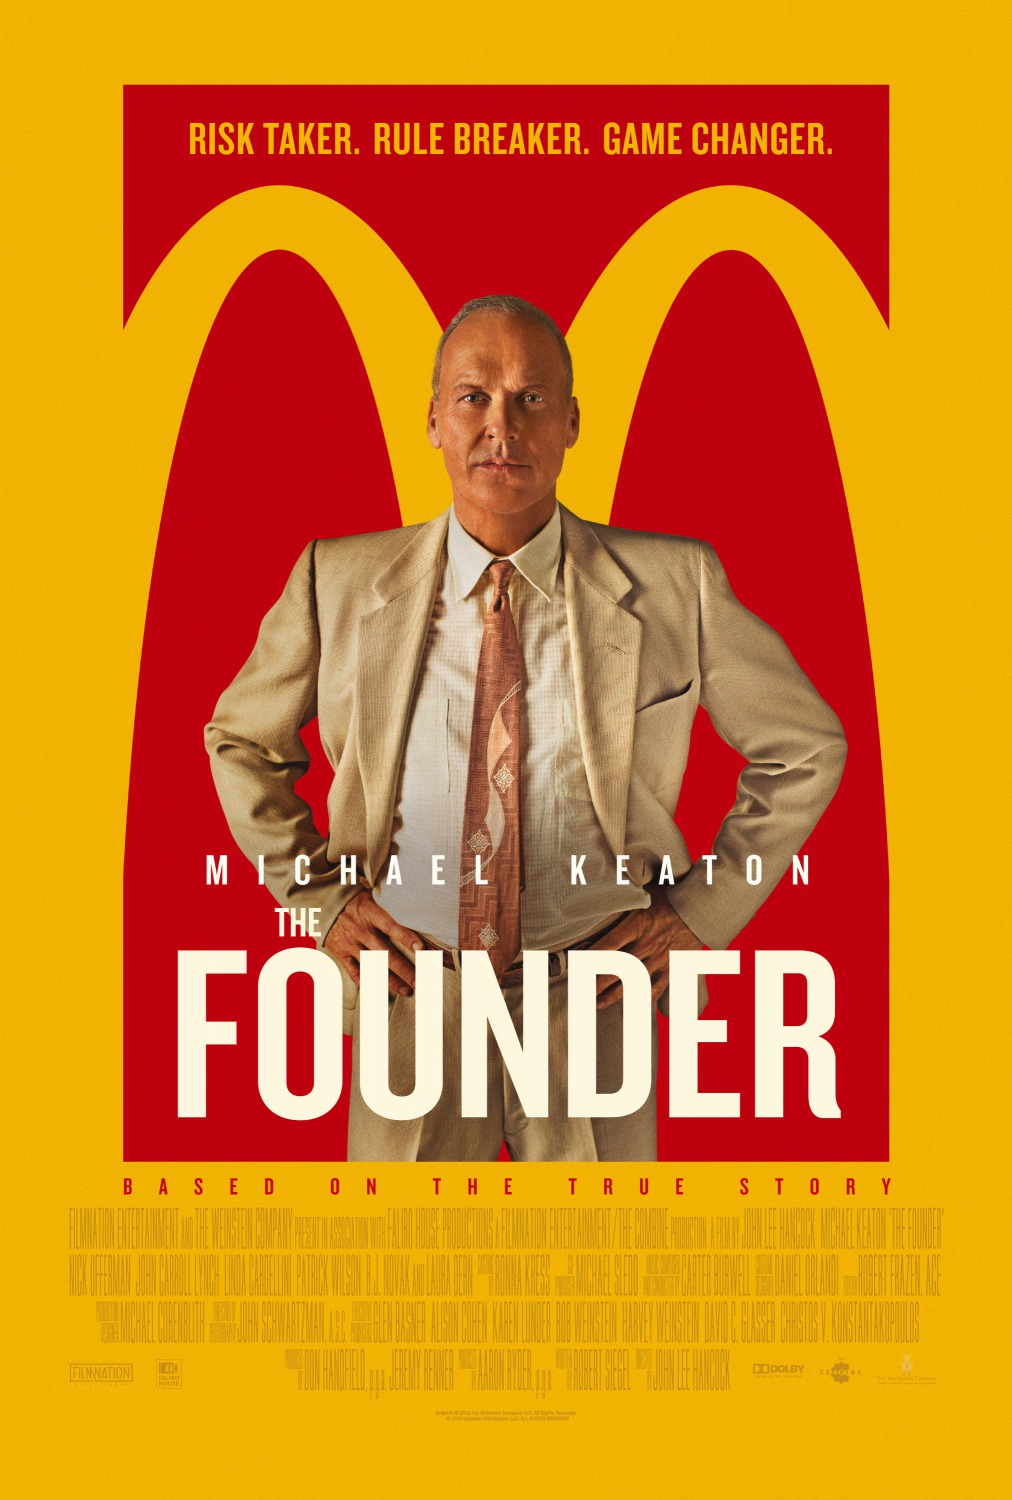 the founder movie review essay